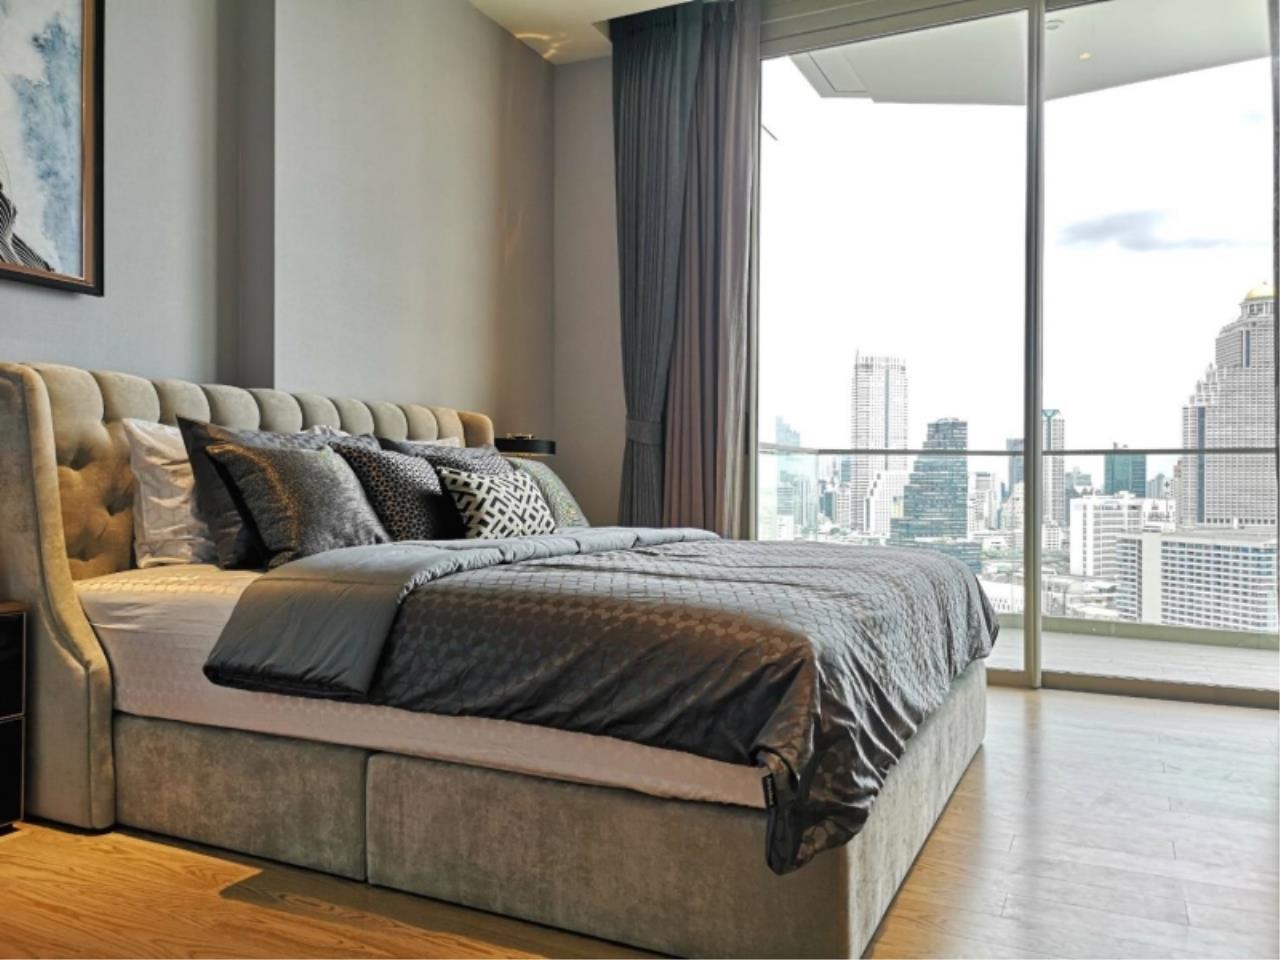 Century21 Skylux Agency's Magnolias Waterfront Residences / Condo For Rent / 1 Bedroom / 66 SQM / Any / Bangkok 3